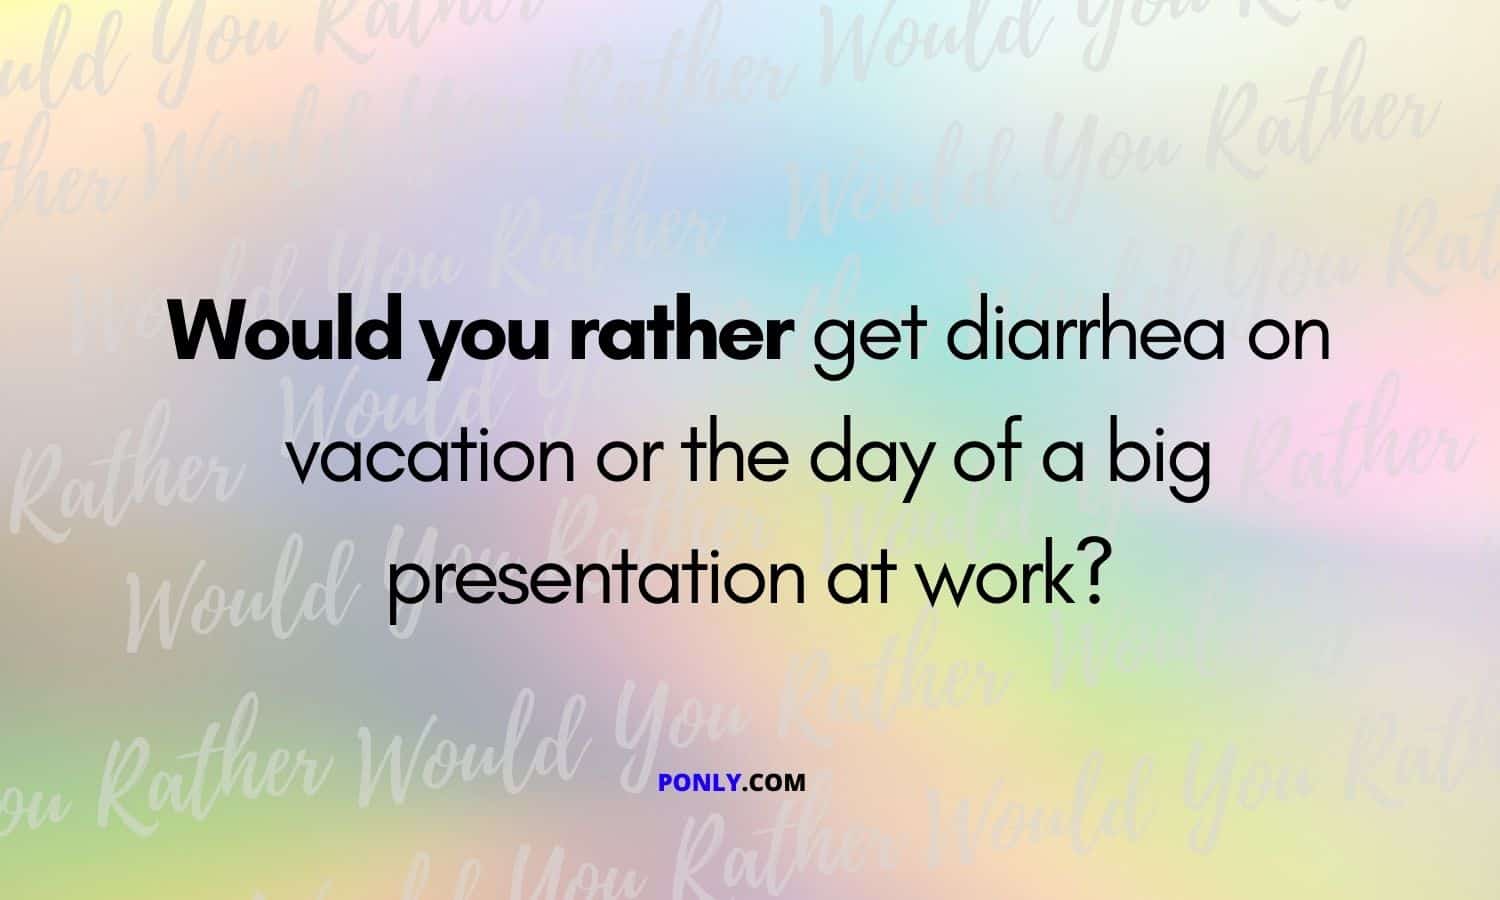 Would you rather questions dirty and funny